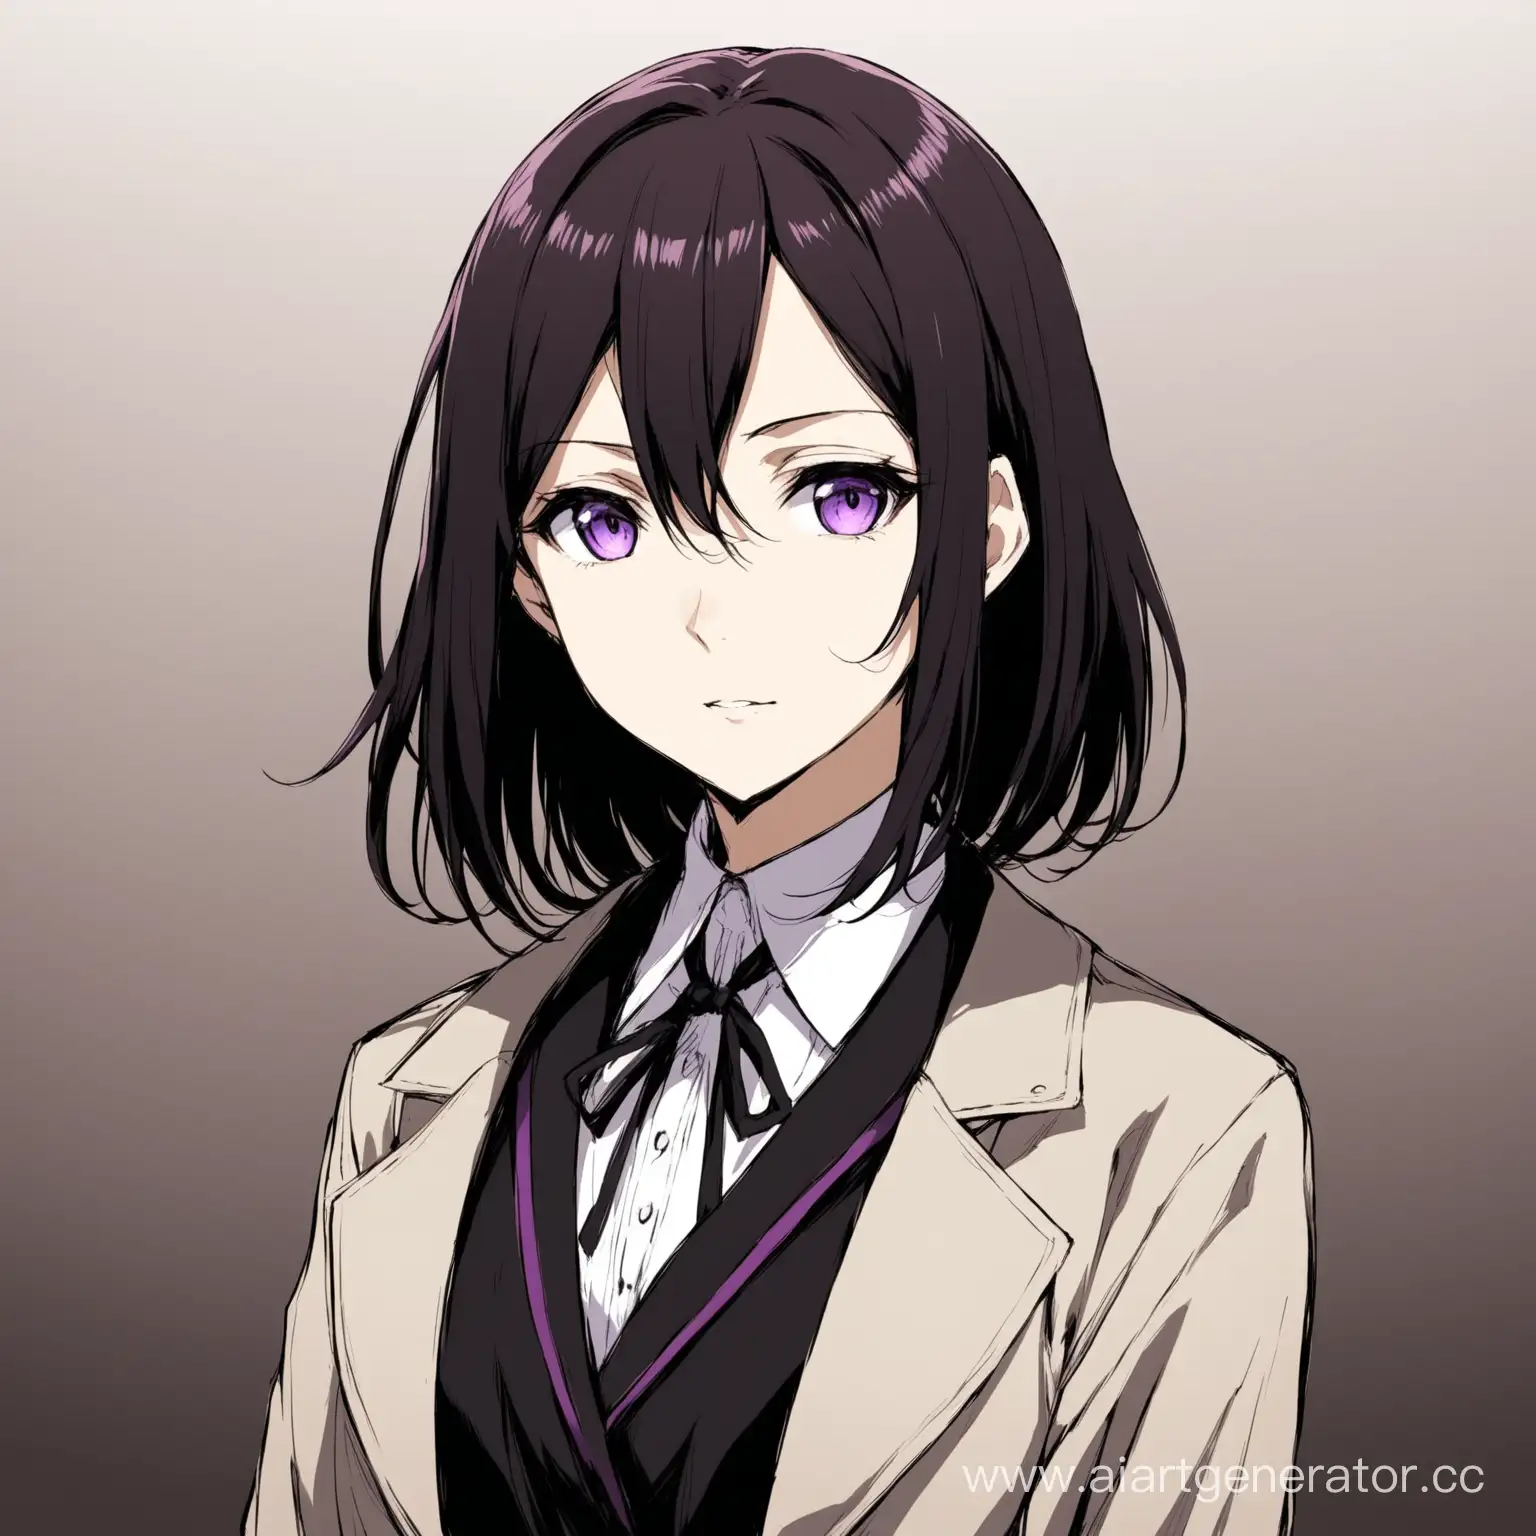 Anime-Bungou-Stray-Dogs-Character-with-Black-Hair-and-Purple-Eyes